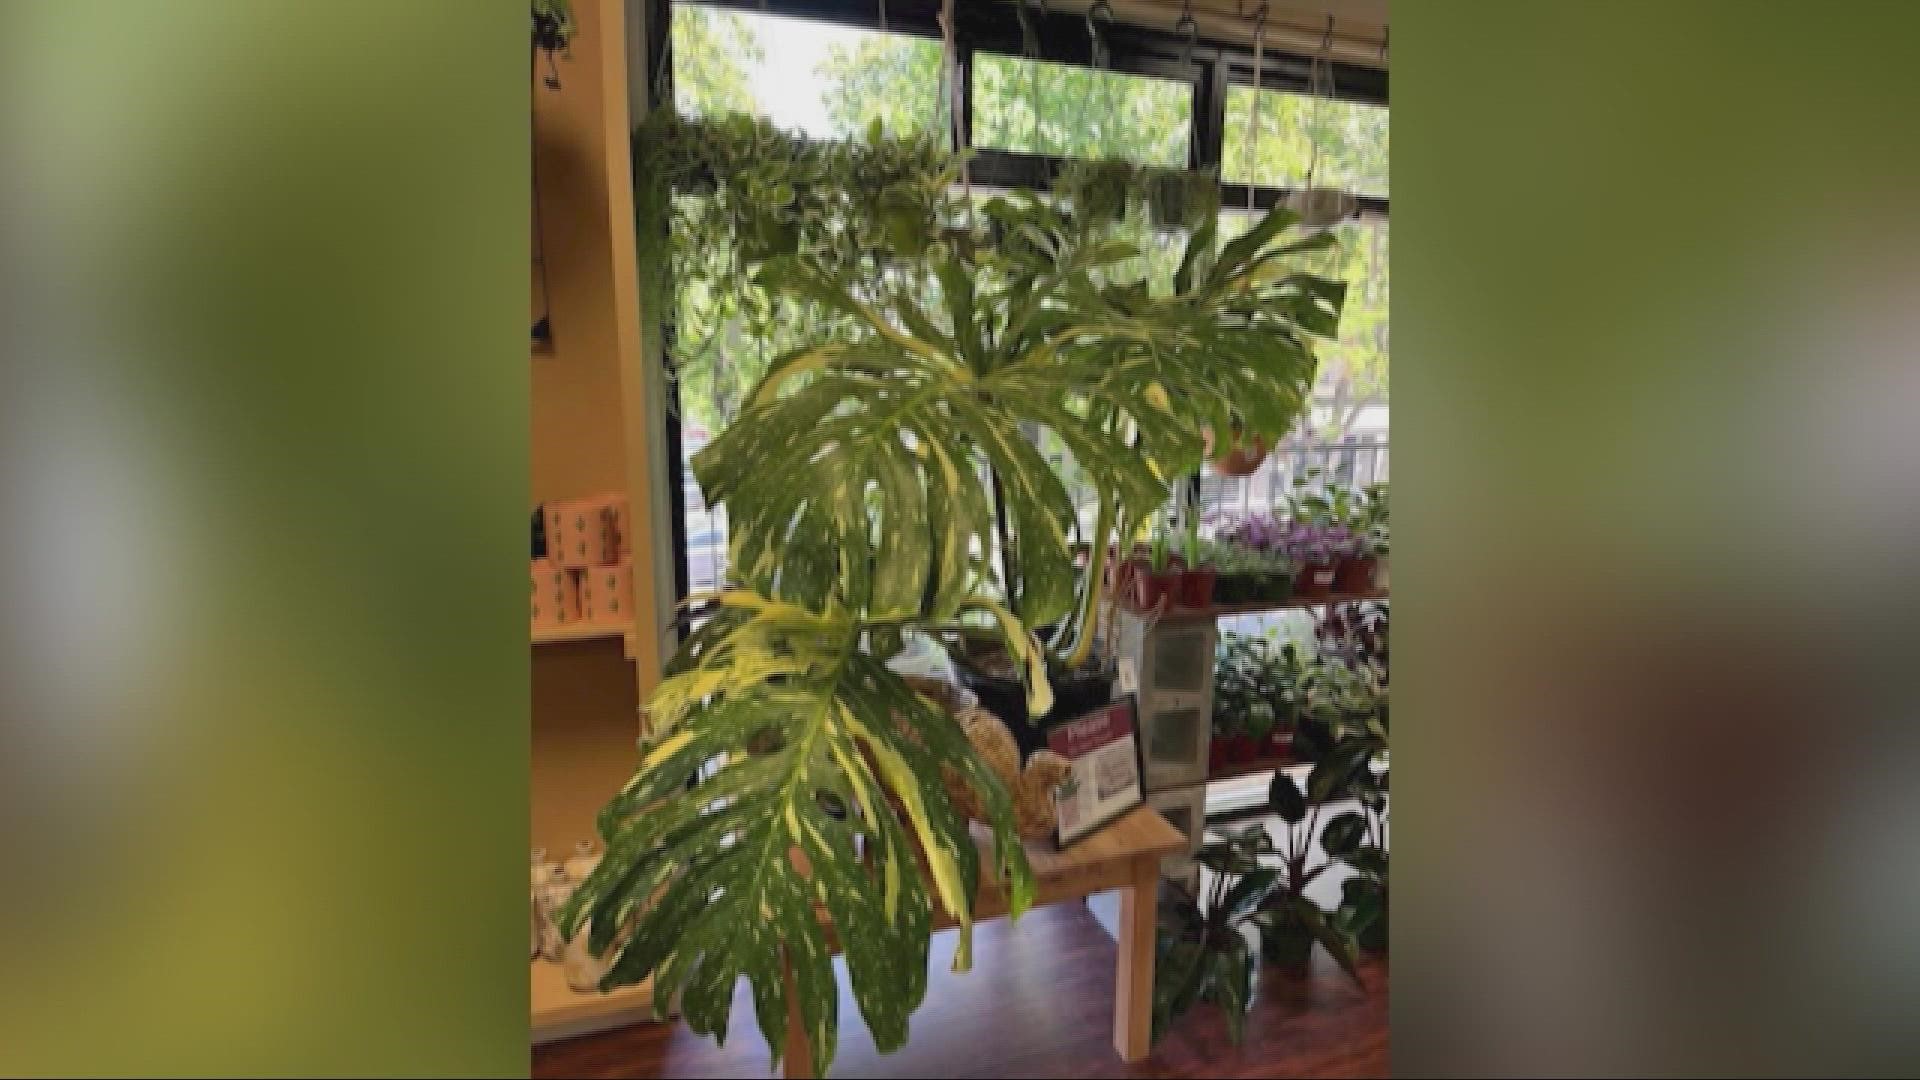 This plant was a monstera Thai constellation plant worth $2,000, and co-owners Ricky Barosa and Larry Groves said they never expected someone to steal a plant.